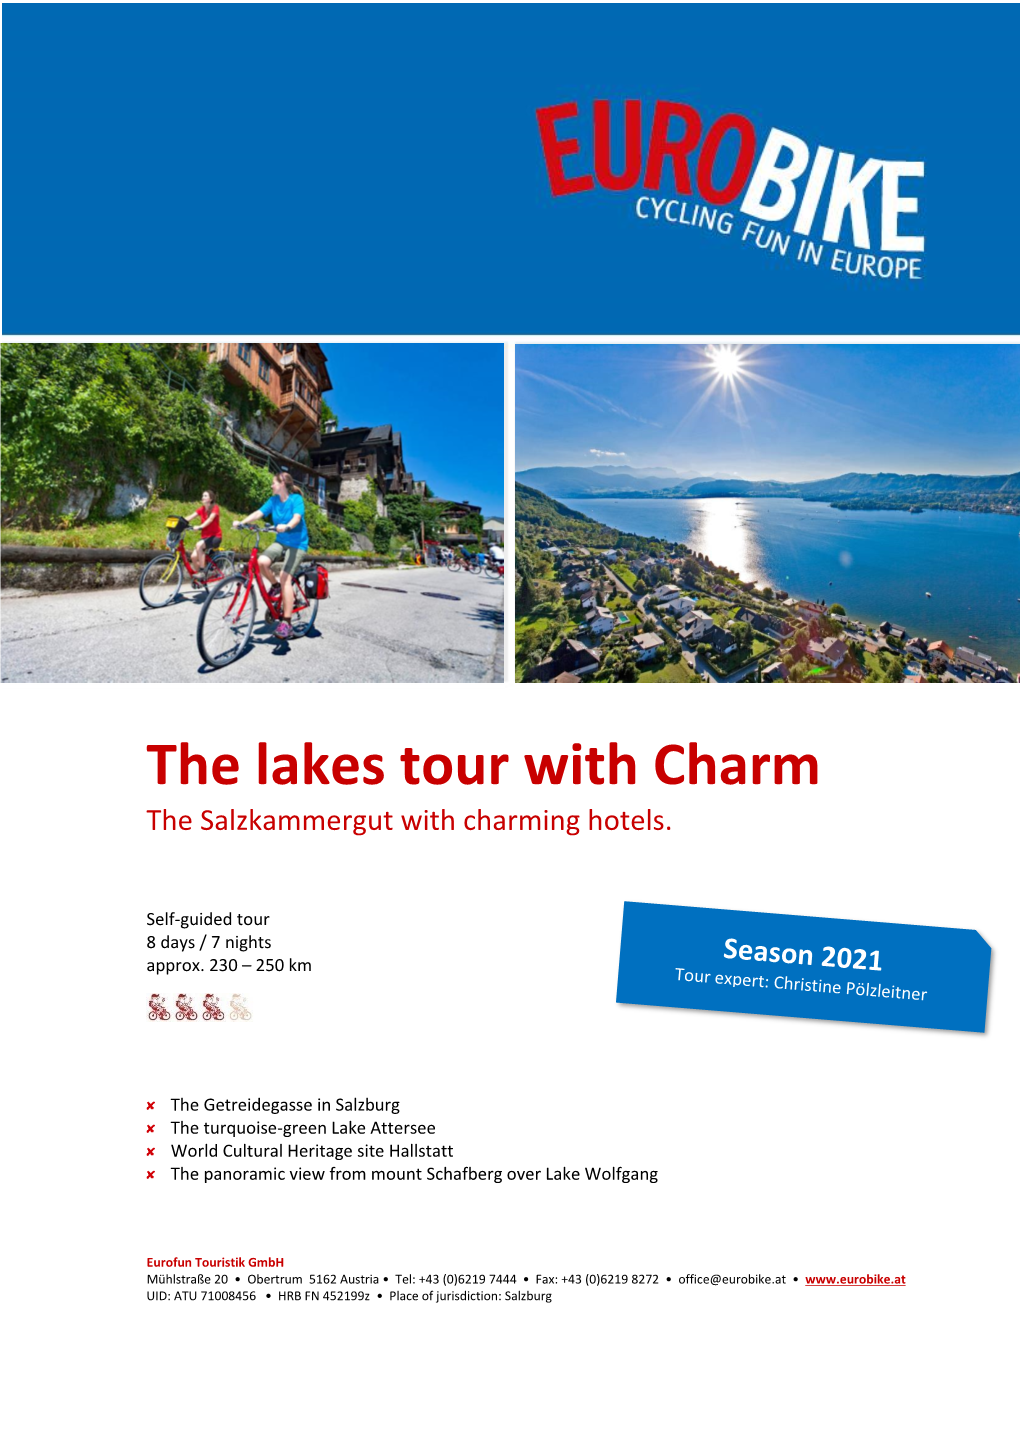 The Lakes Tour with Charm the Salzkammergut with Charming Hotels